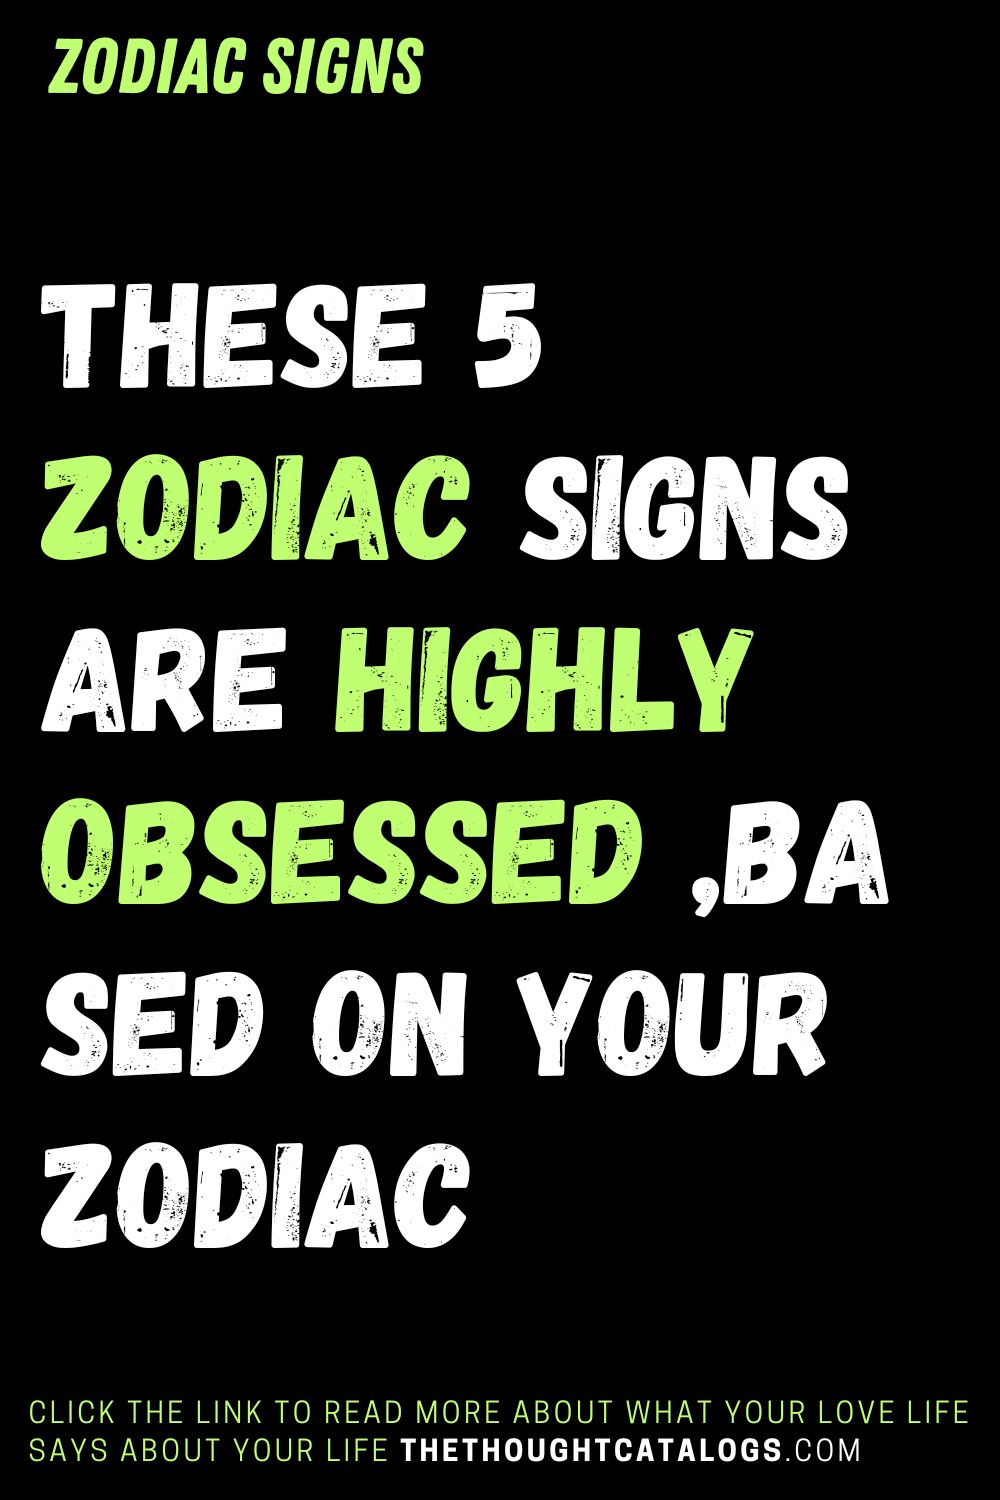 These 5 Zodiac Signs Are Highly Obsessed ,Based On Your Zodiac